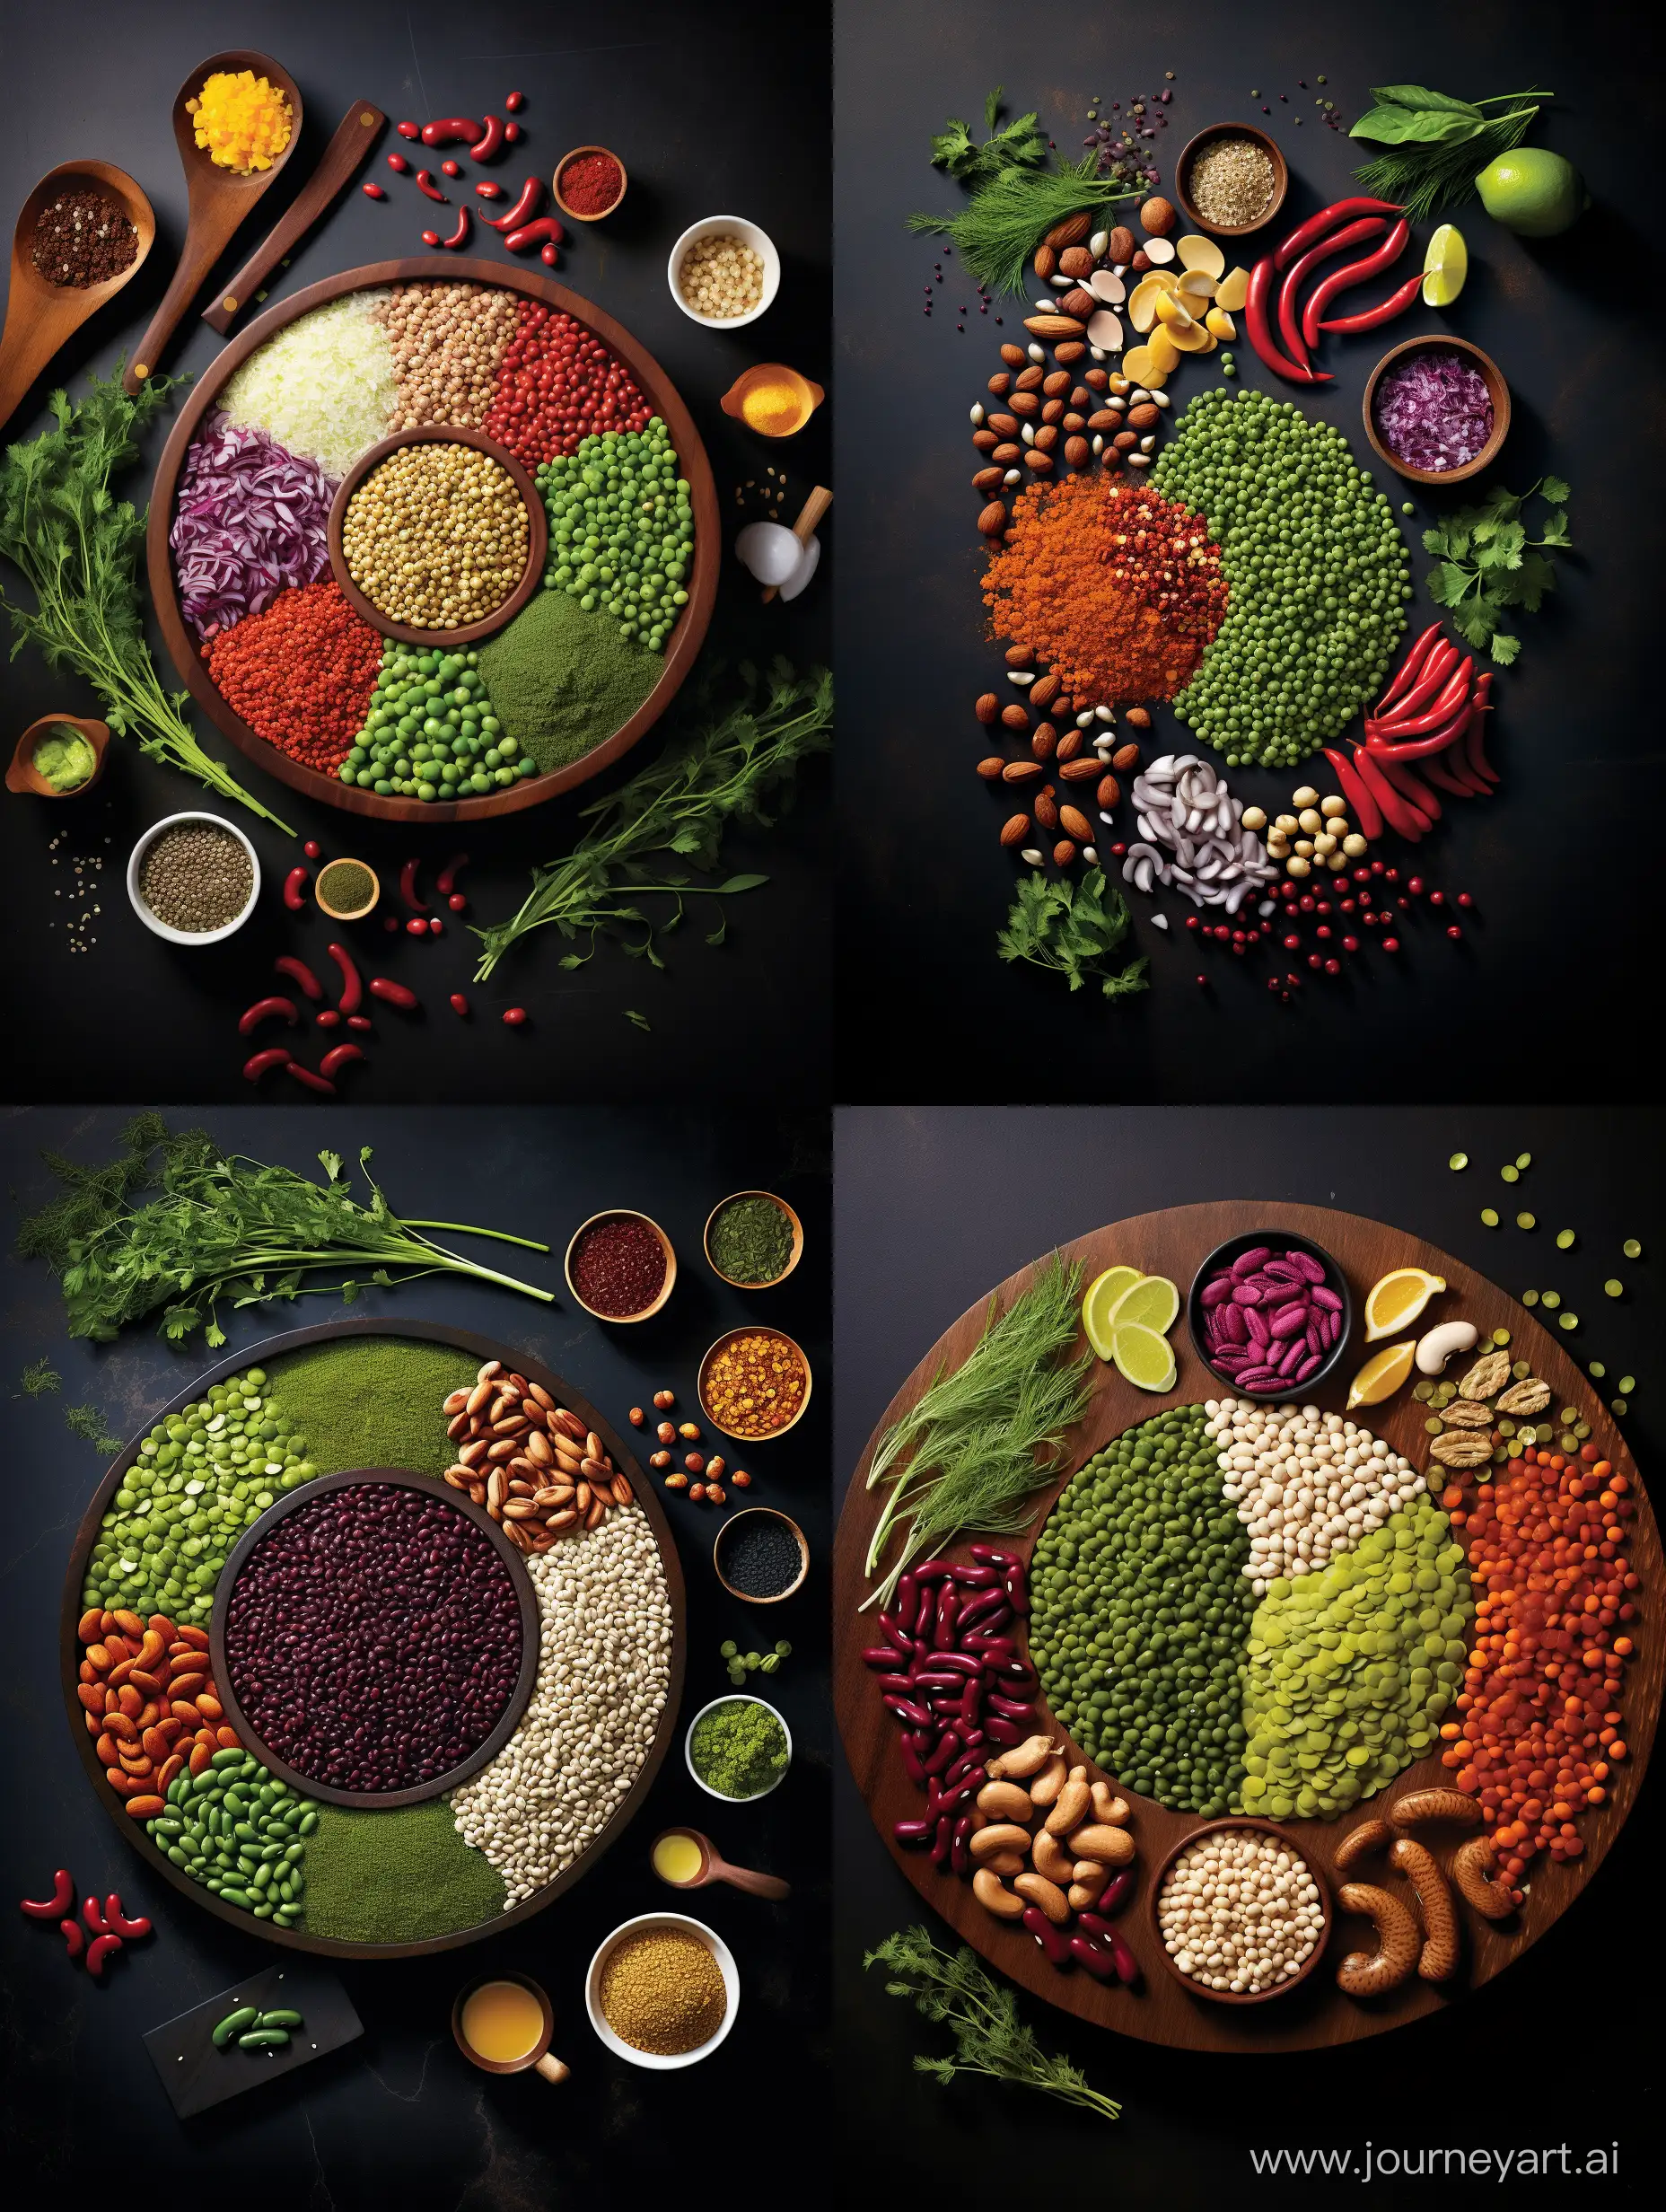 Craft a striking product image displaying a selection of pulses, including Desi chickpeas, Red Speckled kidney beans, Fava beans, Green Mung beans, Light Speckled Kidney beans, and White pea beans. Position the pulses meticulously on a sleek, dark stone surface to contrast their vibrant colors, with a subtle reflection to suggest premium quality. Ensure the lighting is soft yet ample to bring out the textures and natural beauty of the beans, adding depth and dimension to the composition
